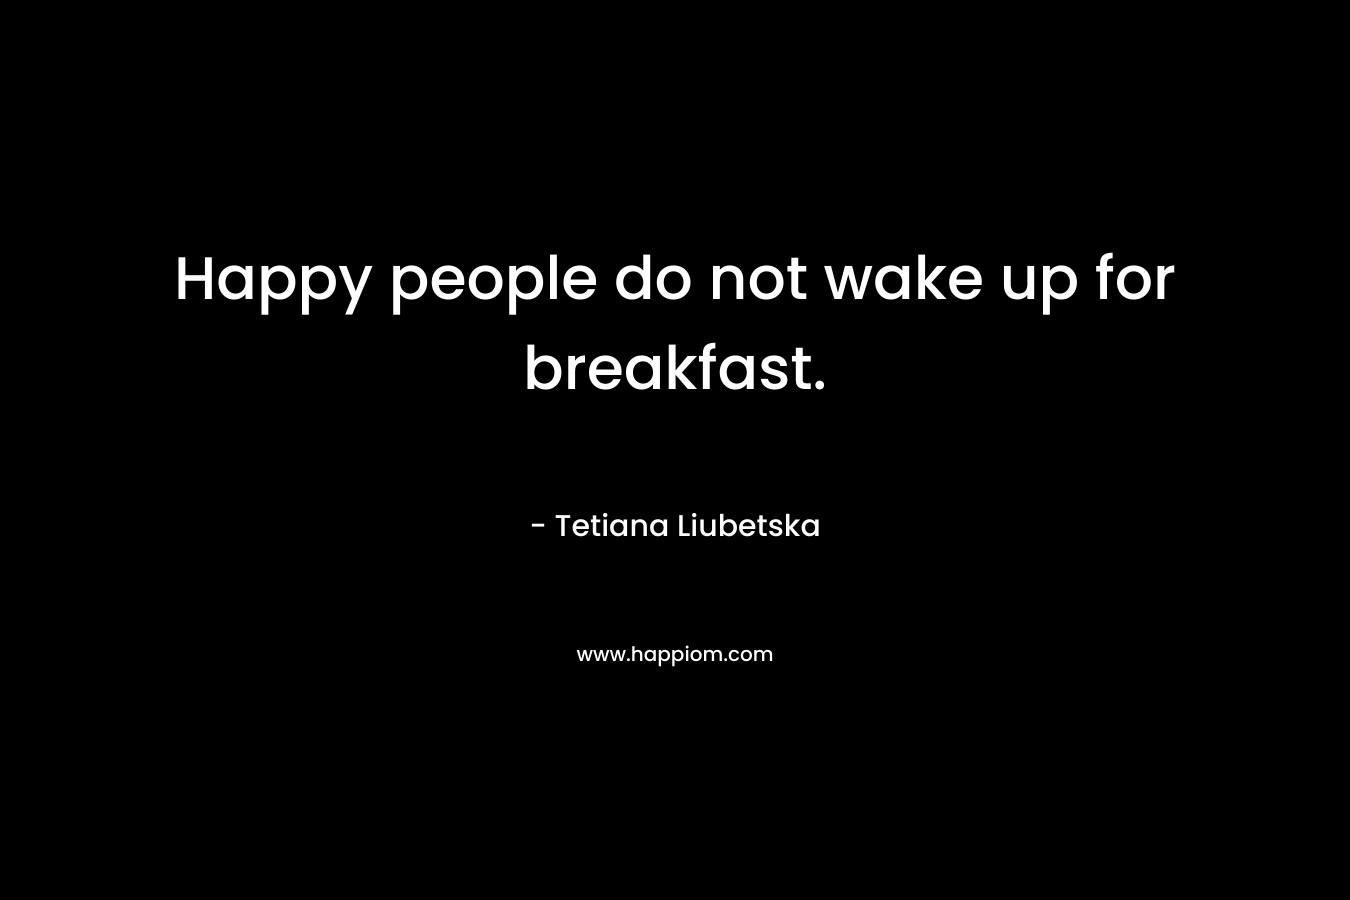 Happy people do not wake up for breakfast.